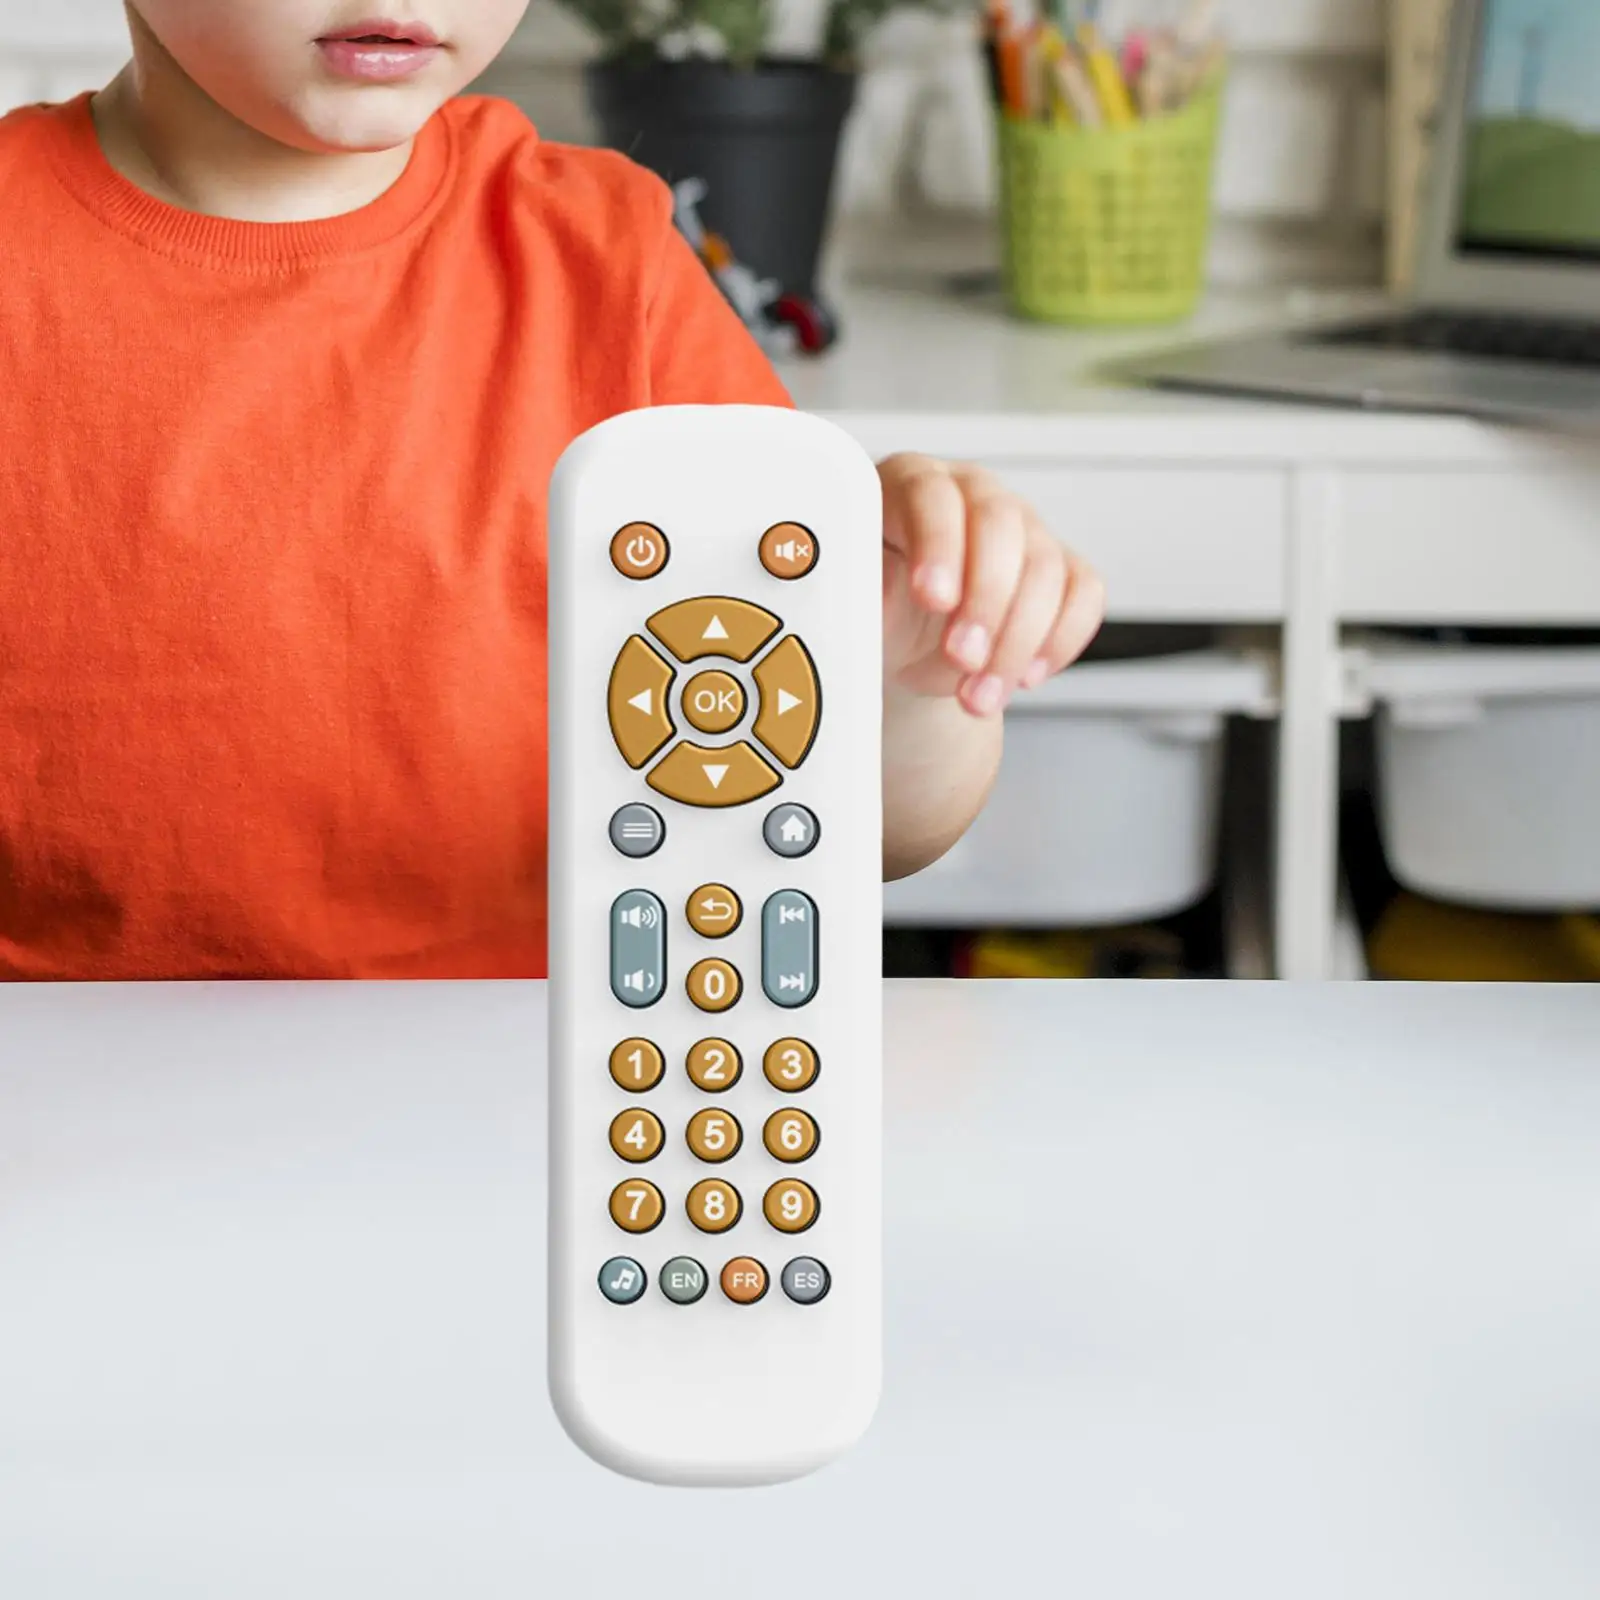 Realistic Toddler TV Remote Toy Educational Music TV Remote Controller for Babies Girls Boys Toddlers 1 2 3 Year Old Best Gift